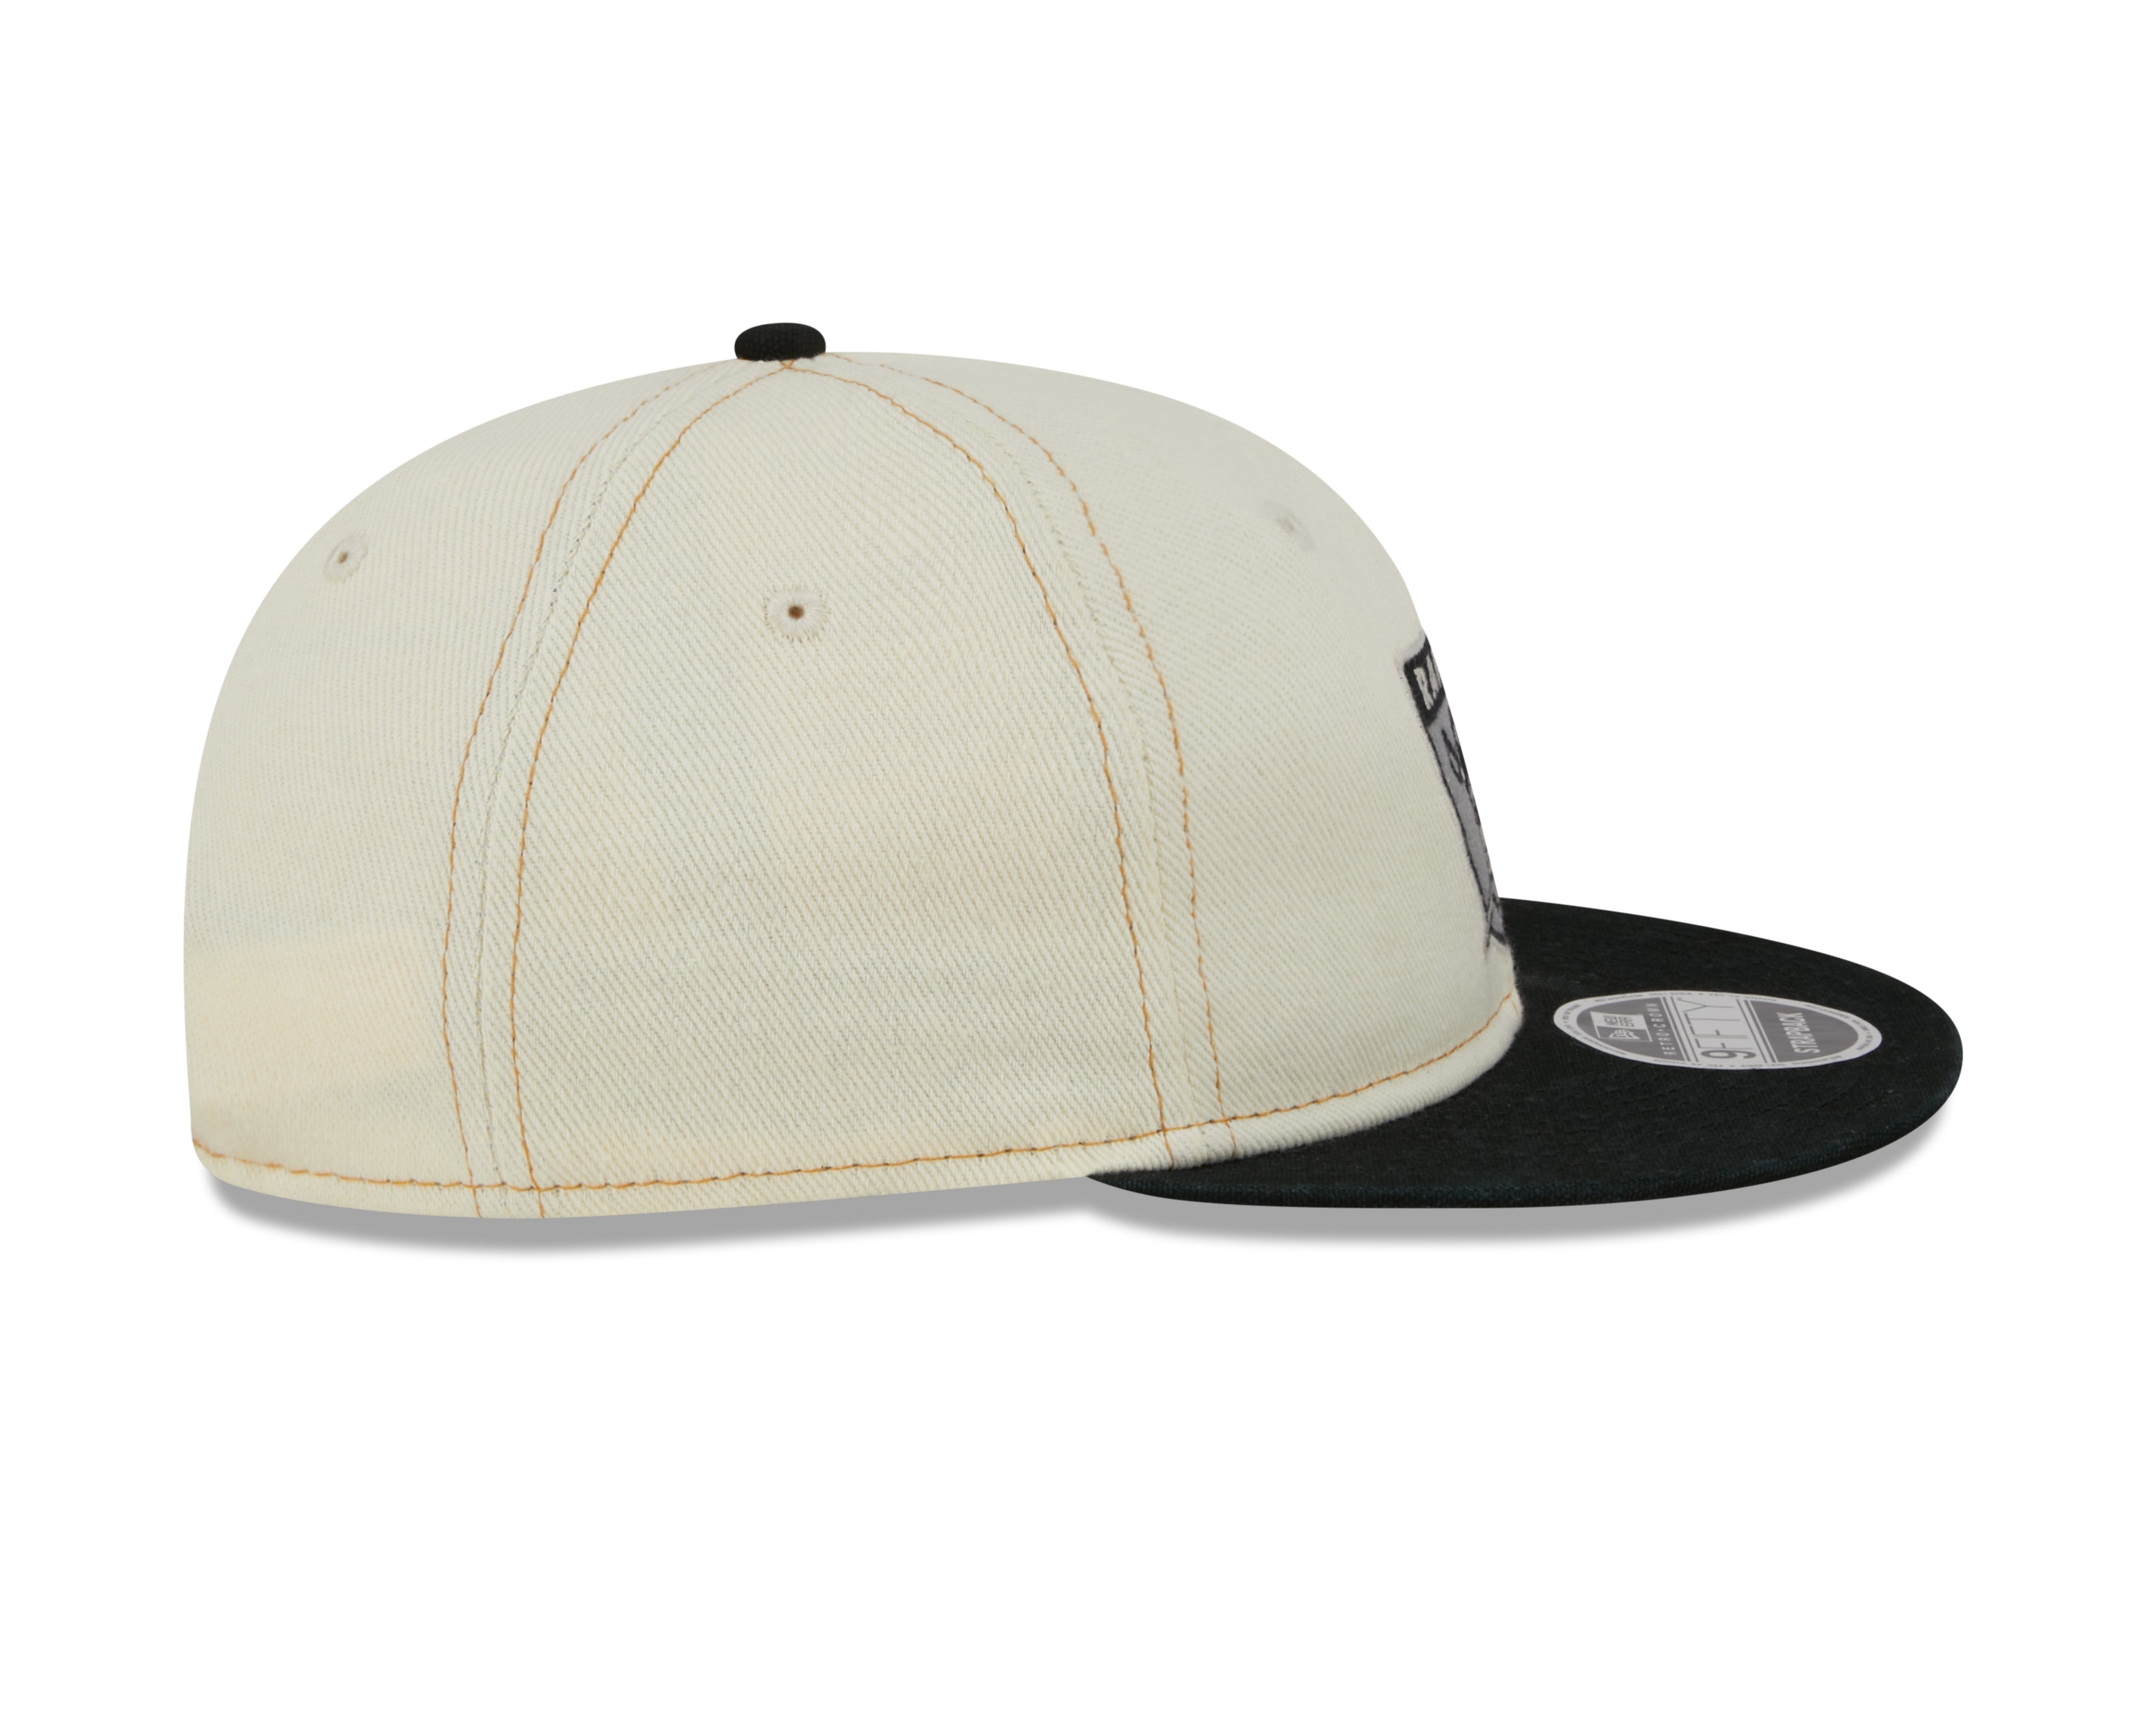 New Era caps, 59Fifty and Snapbacks - exclusive selection of hats